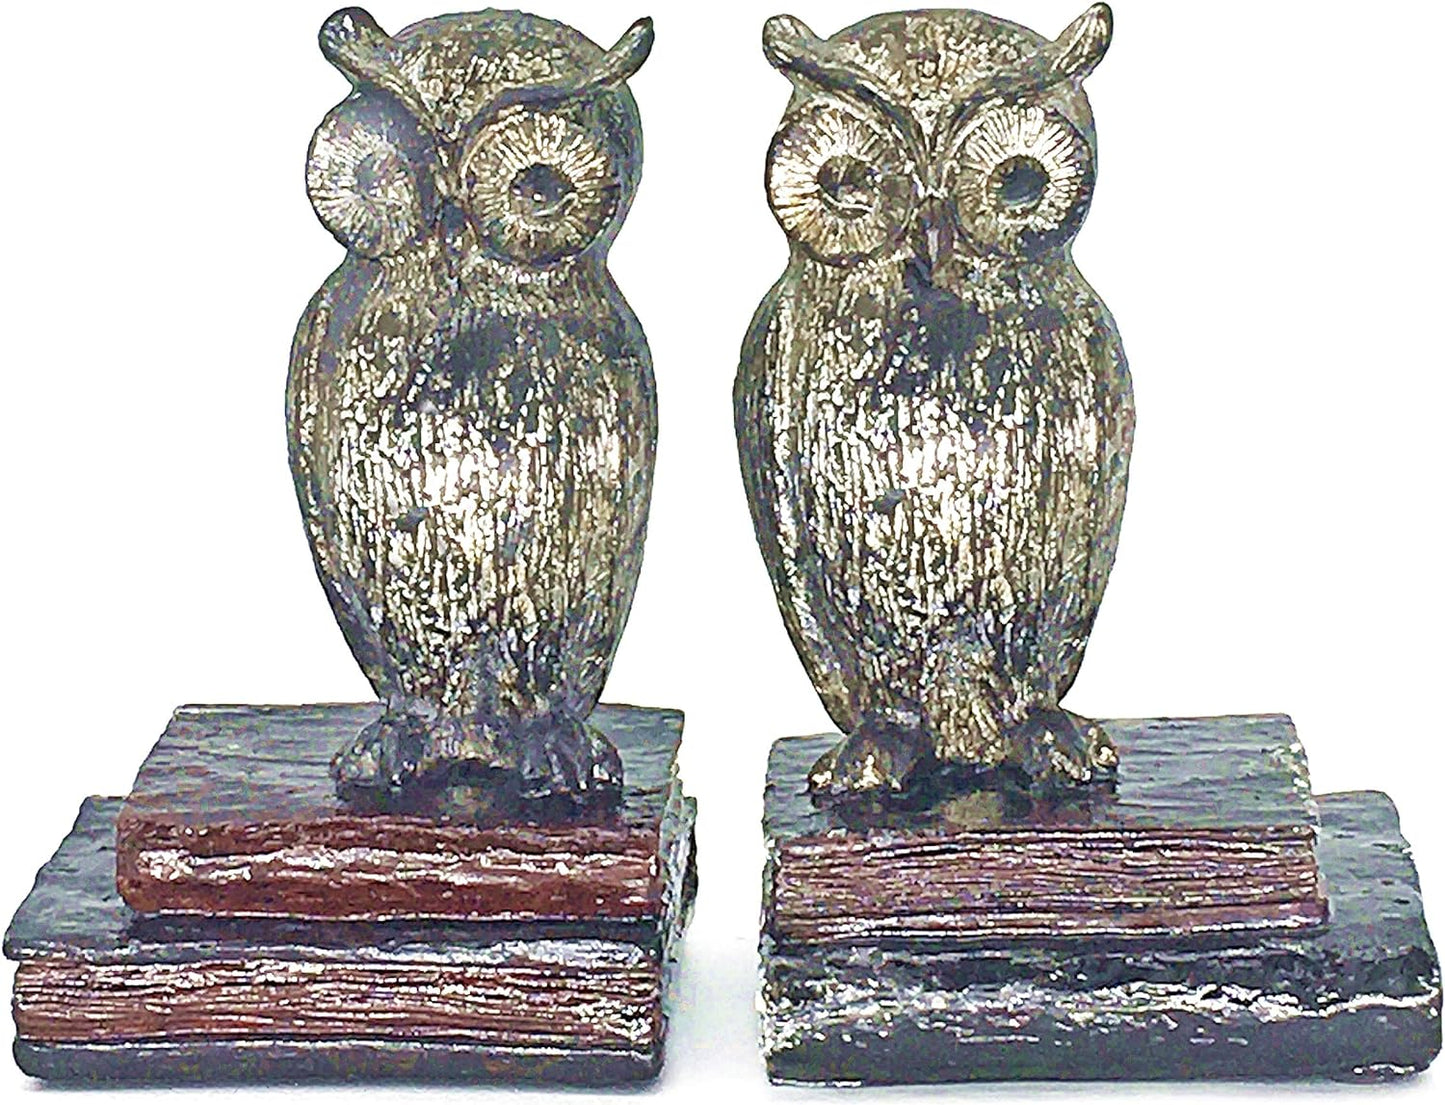 Decorative Bookends Owl Wide Eyed Rustic Retro Shabby Chic Unique Book Ends Birds Boho Farmhouse Home Decoration Office Library Shelves Stoppers Holder Nonskid Scholastic Kids Vintage